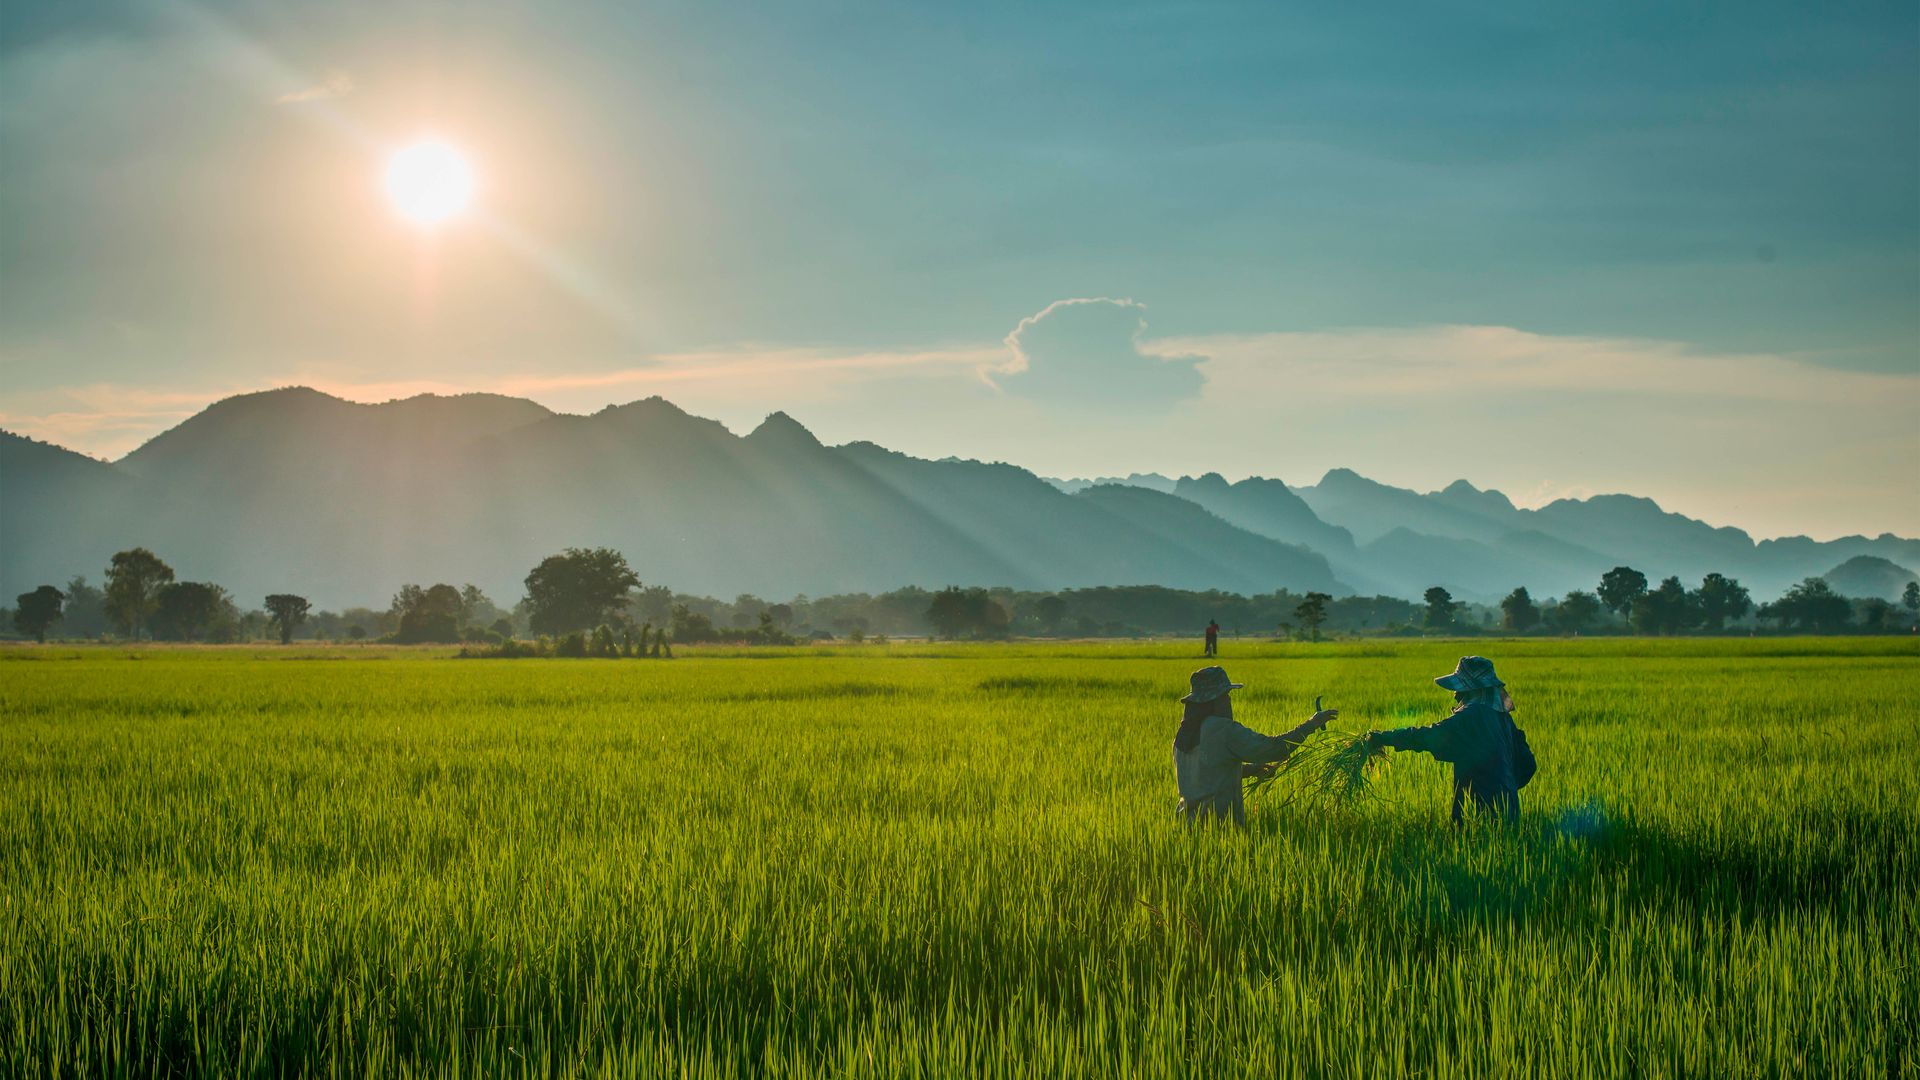 Image of two farmers harvesting crops in a field